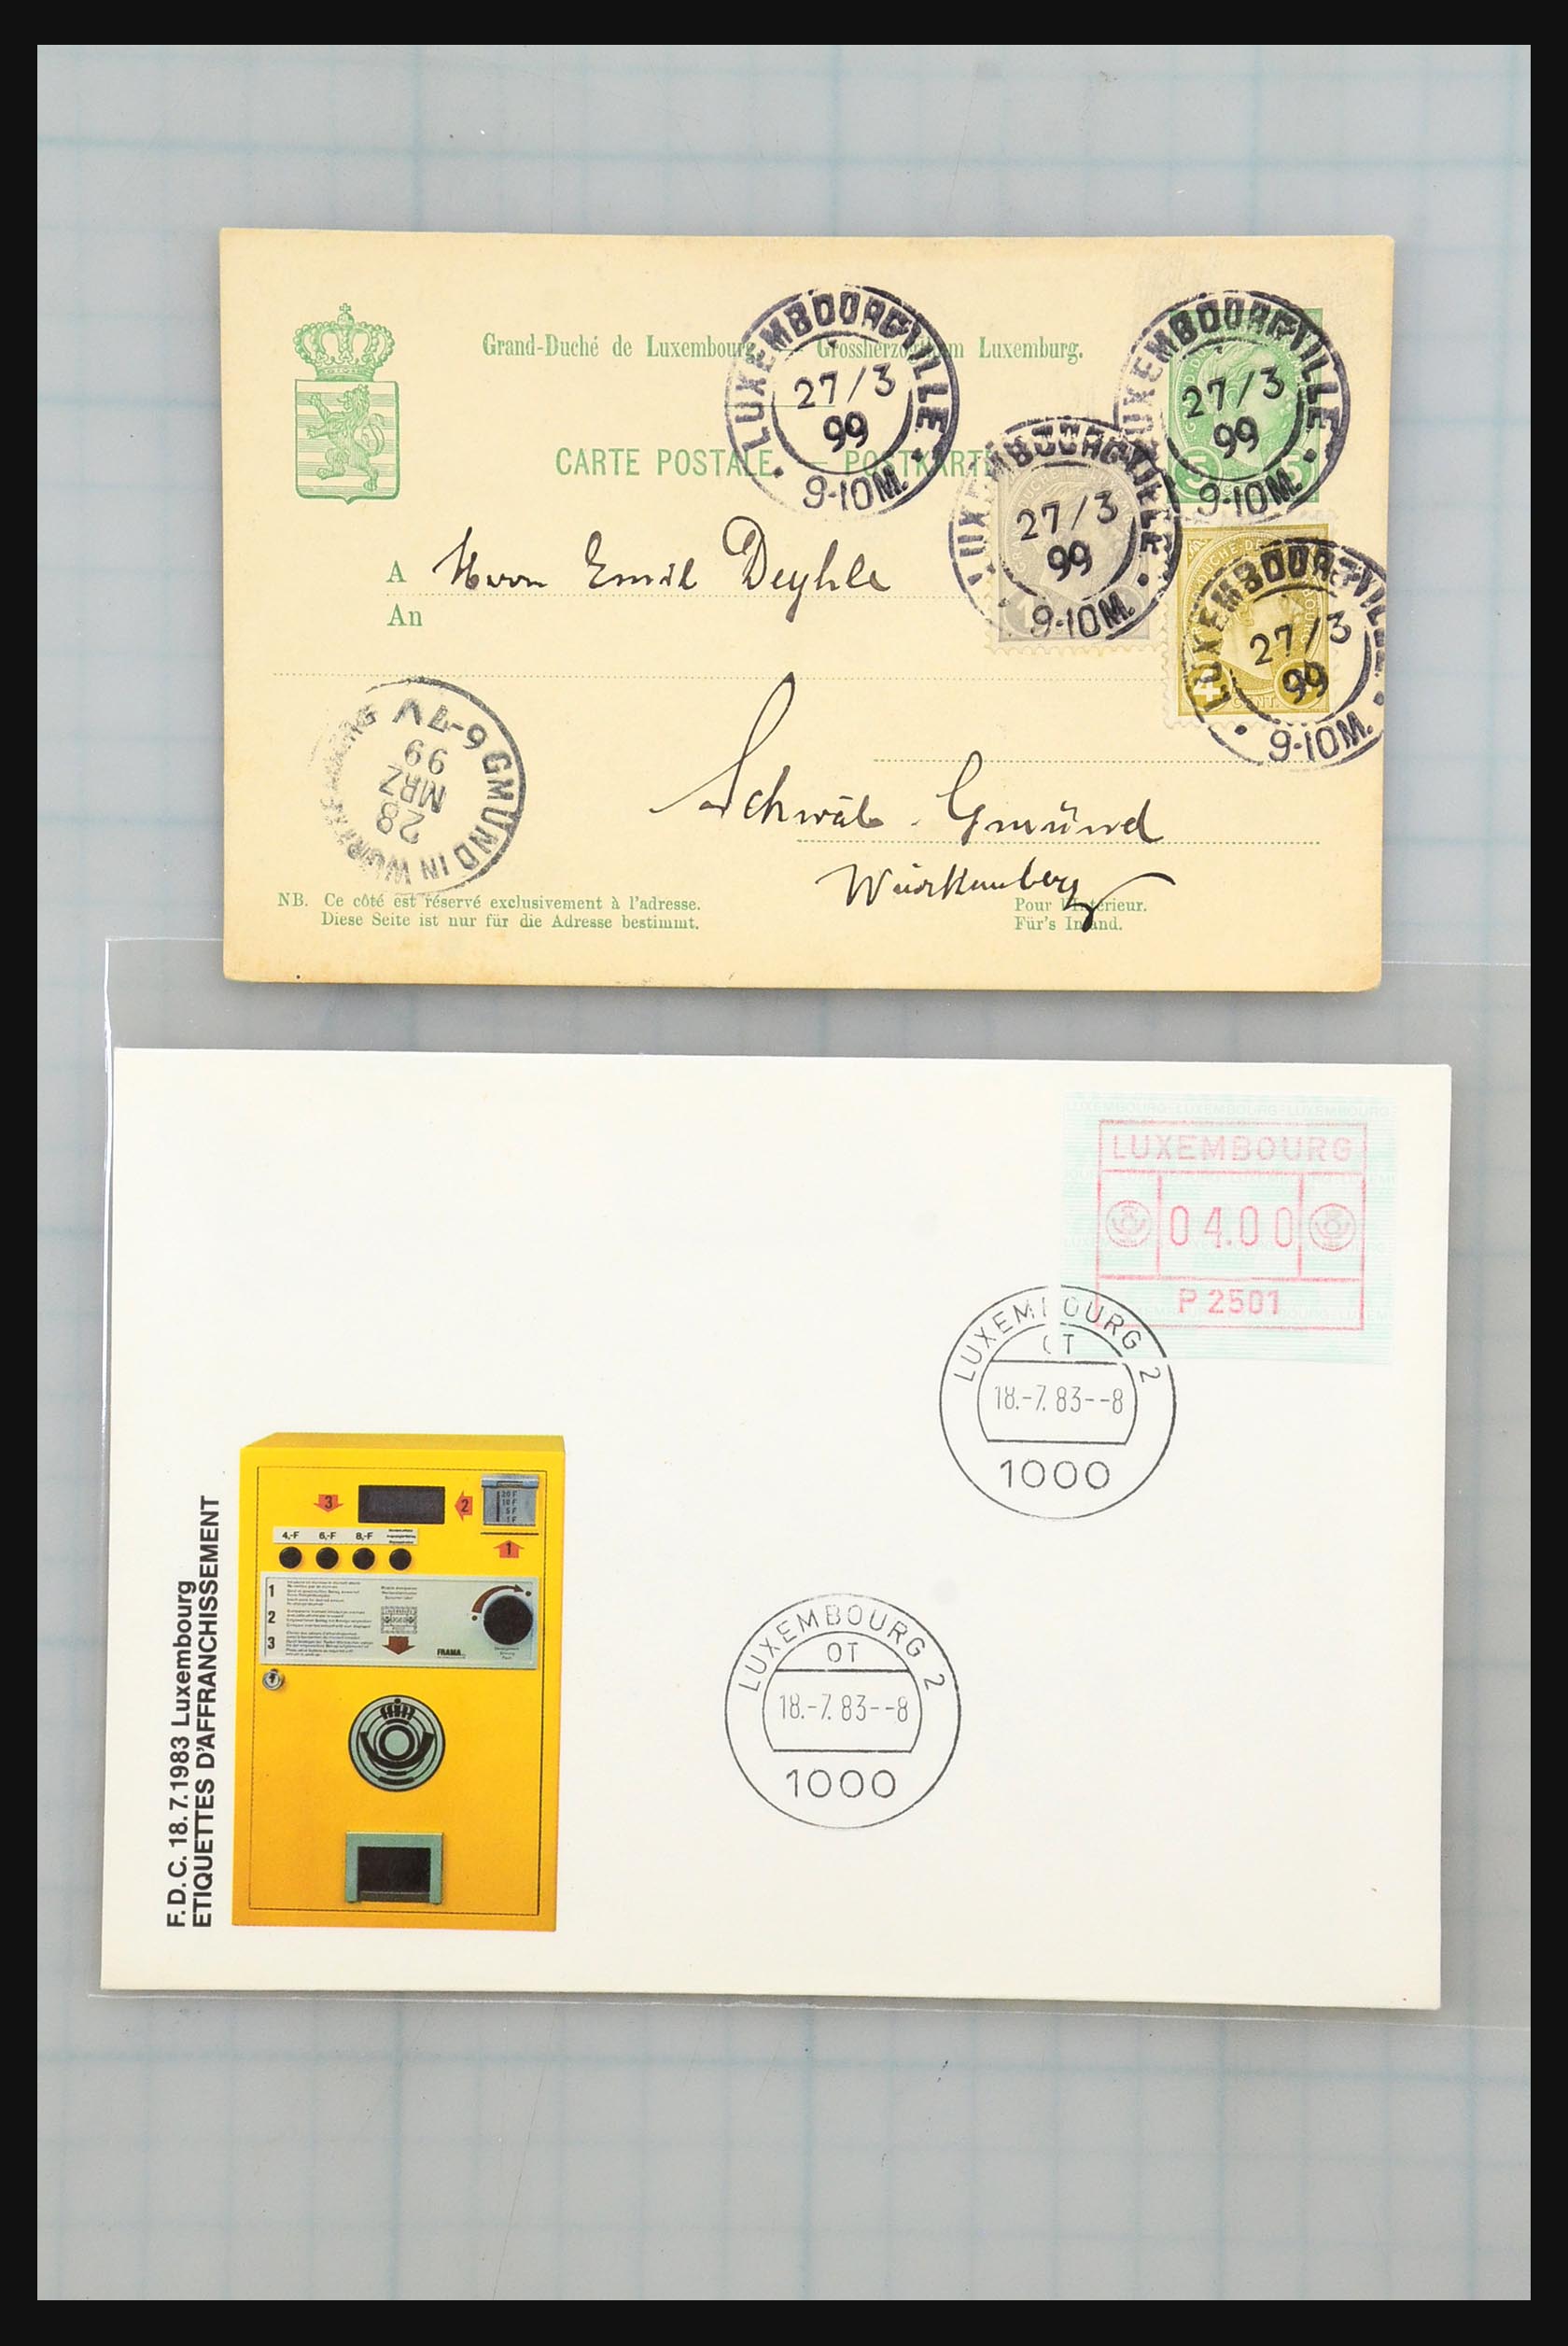 31358 002 - 31358 Portugal/Luxemburg/Greece covers 1880-1960.